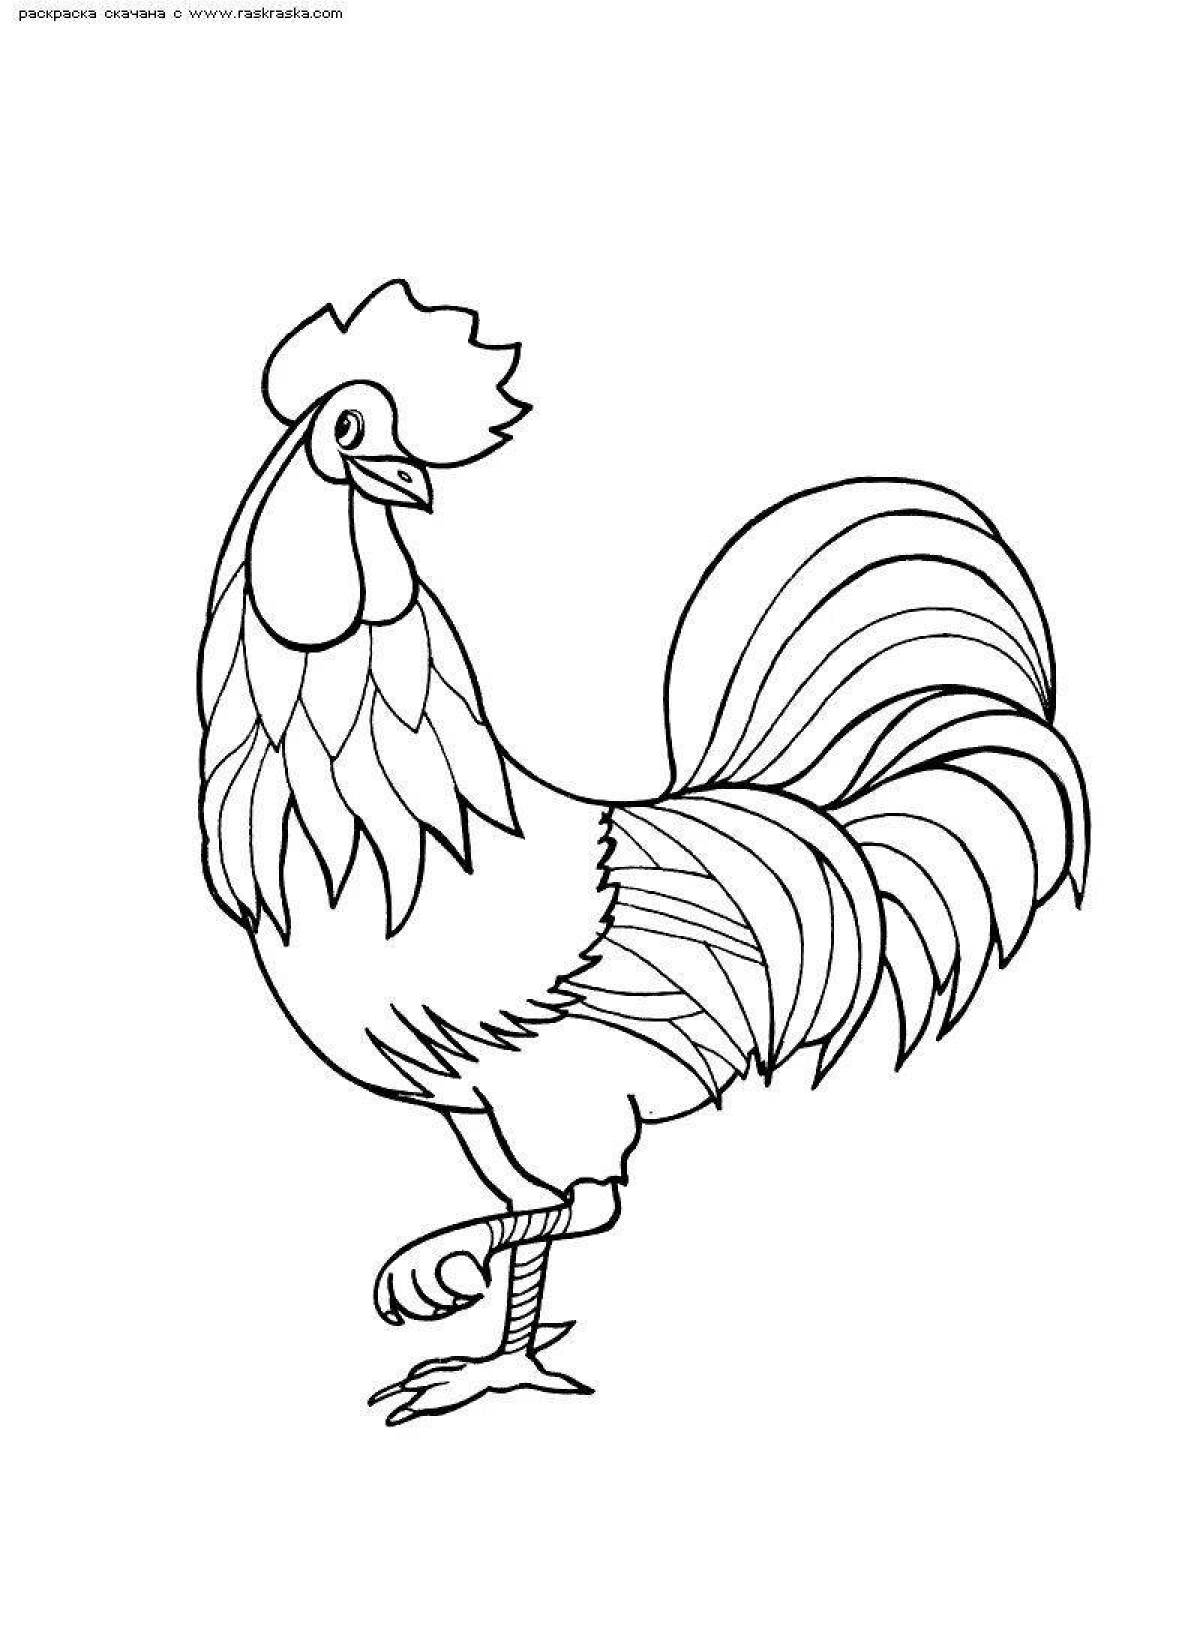 Coloring book joyful rooster for children 6-7 years old